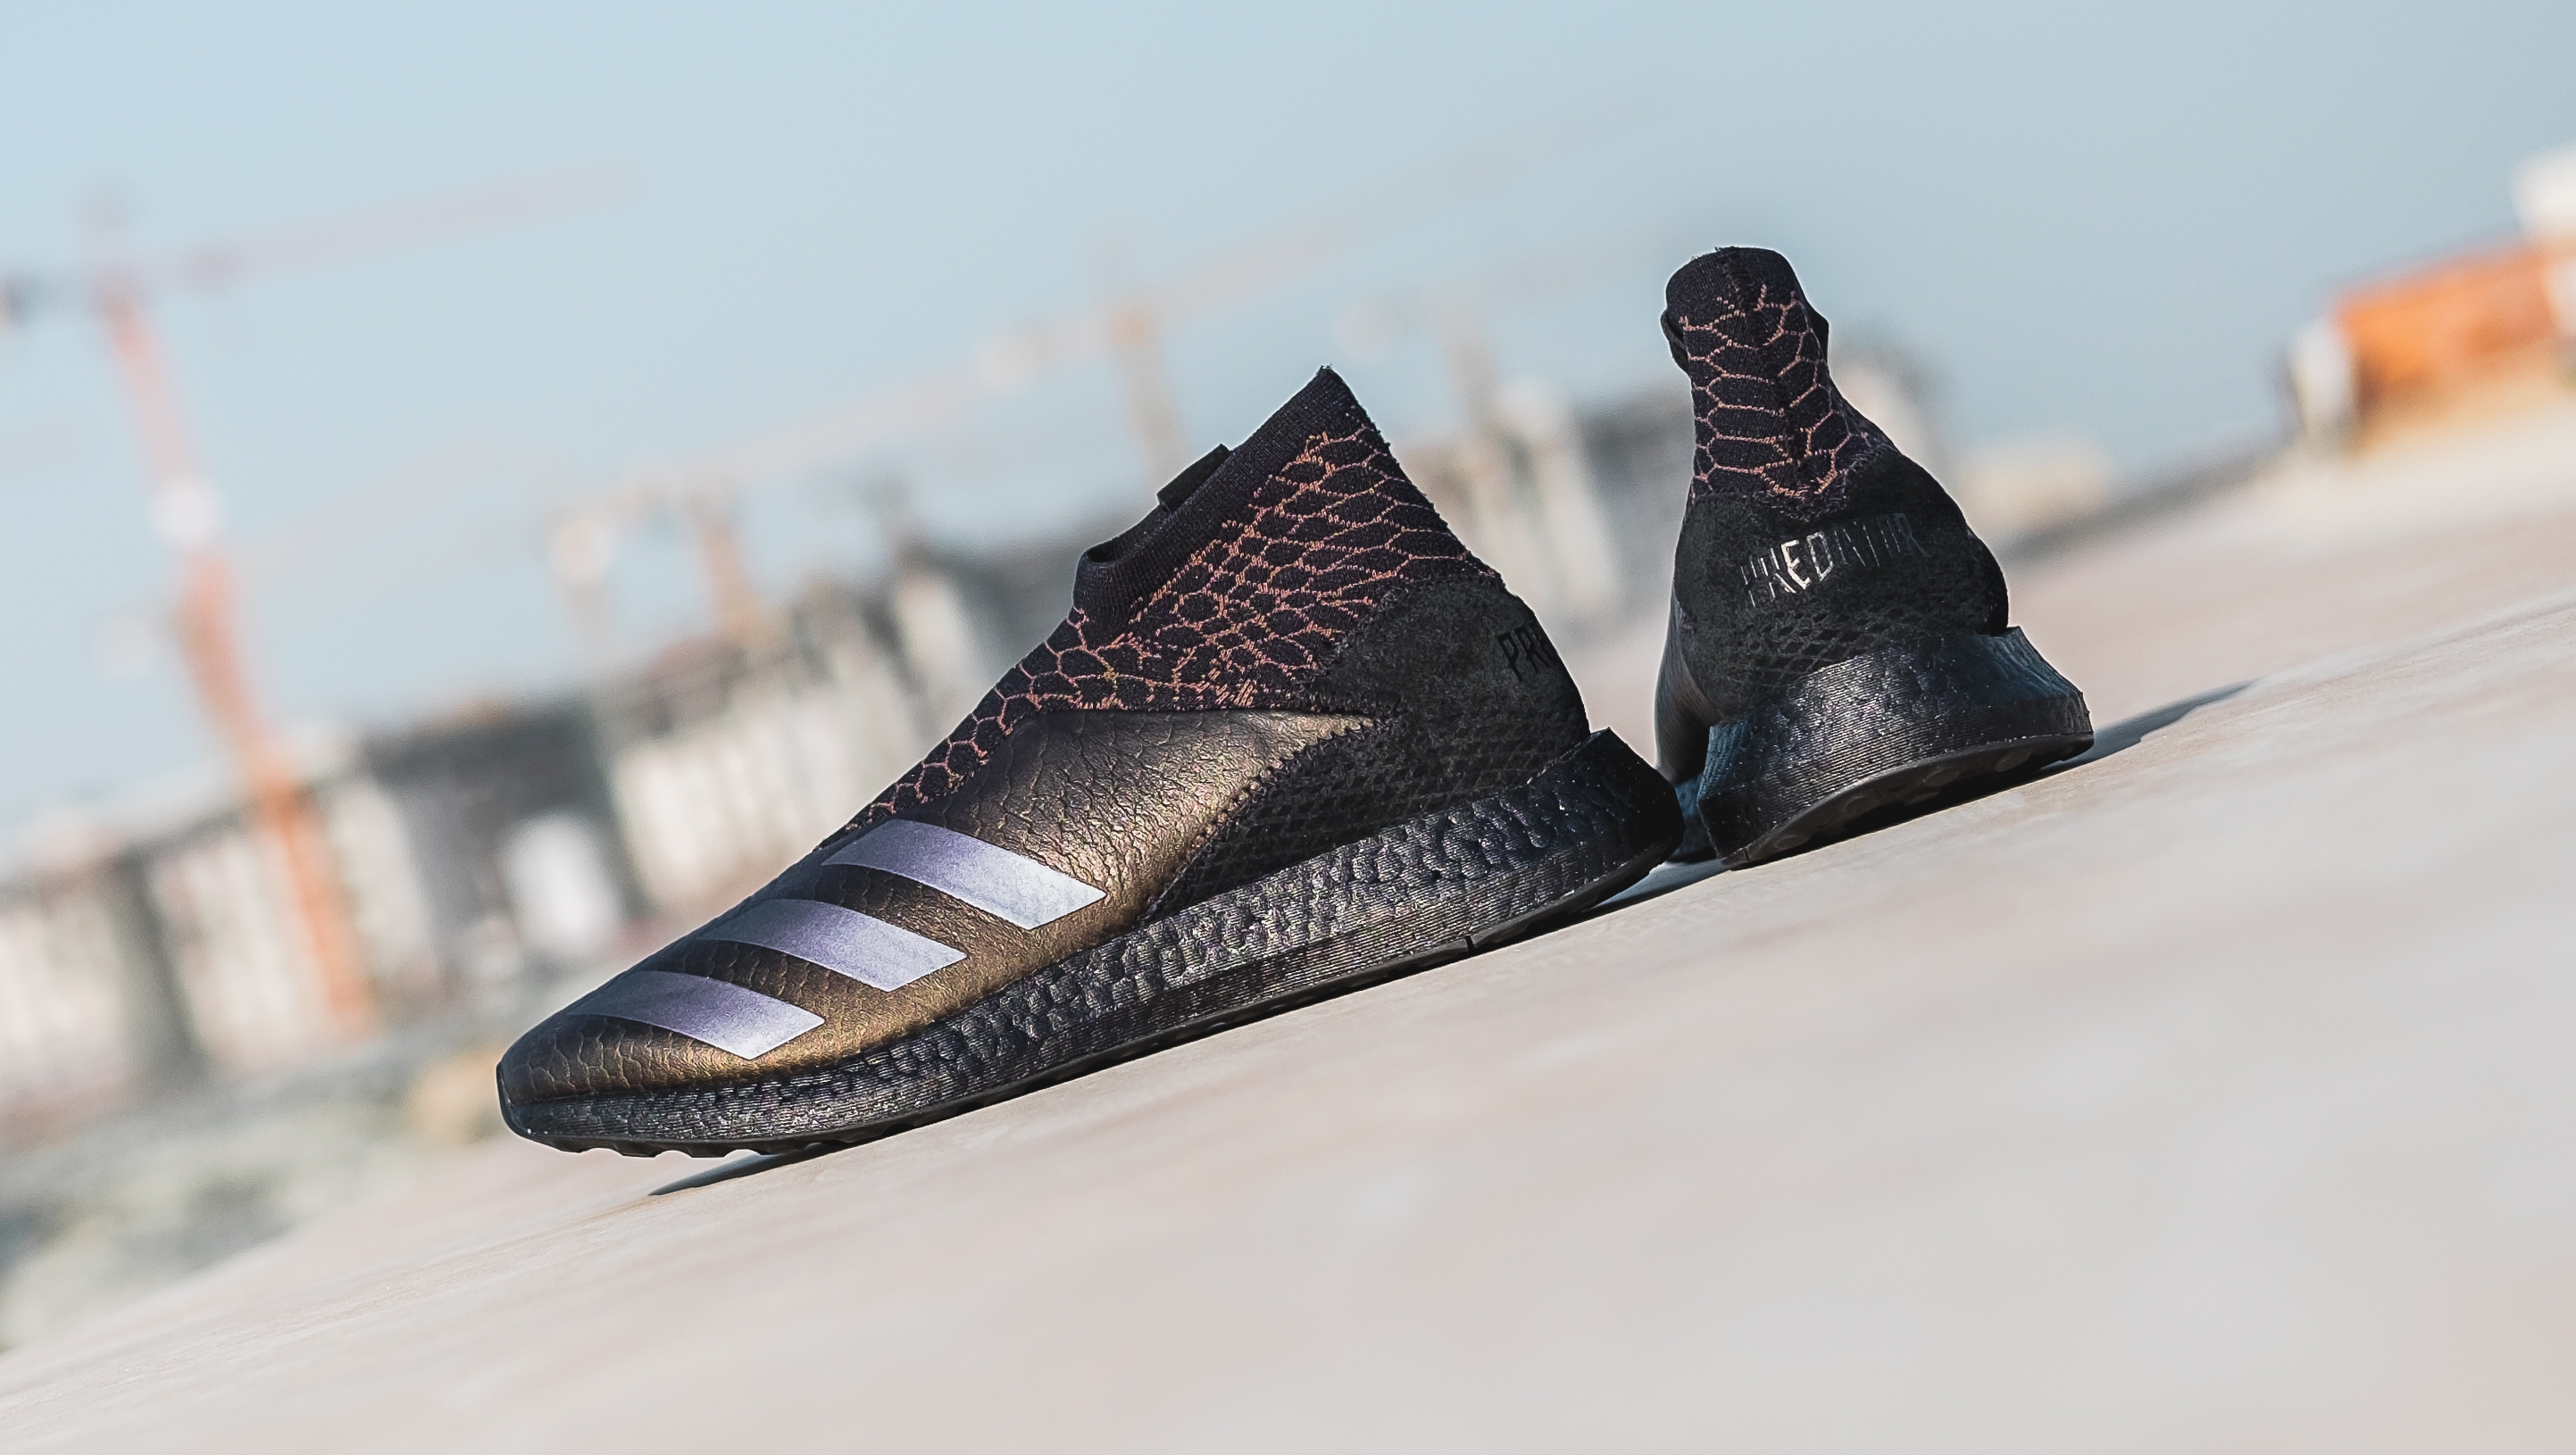 thegoodlife. on Twitter: "The adidas Predator 20.1 ANML is now available online and in-store | UK7 UK11 | AED775 ⁣ https://t.co/qApVfuPnwE | WORLDWIDE SHIPPING⁣ #TheGoodLifeSpaceDubai #adidas #dubai https://t.co/gjPVN1tkkc" /